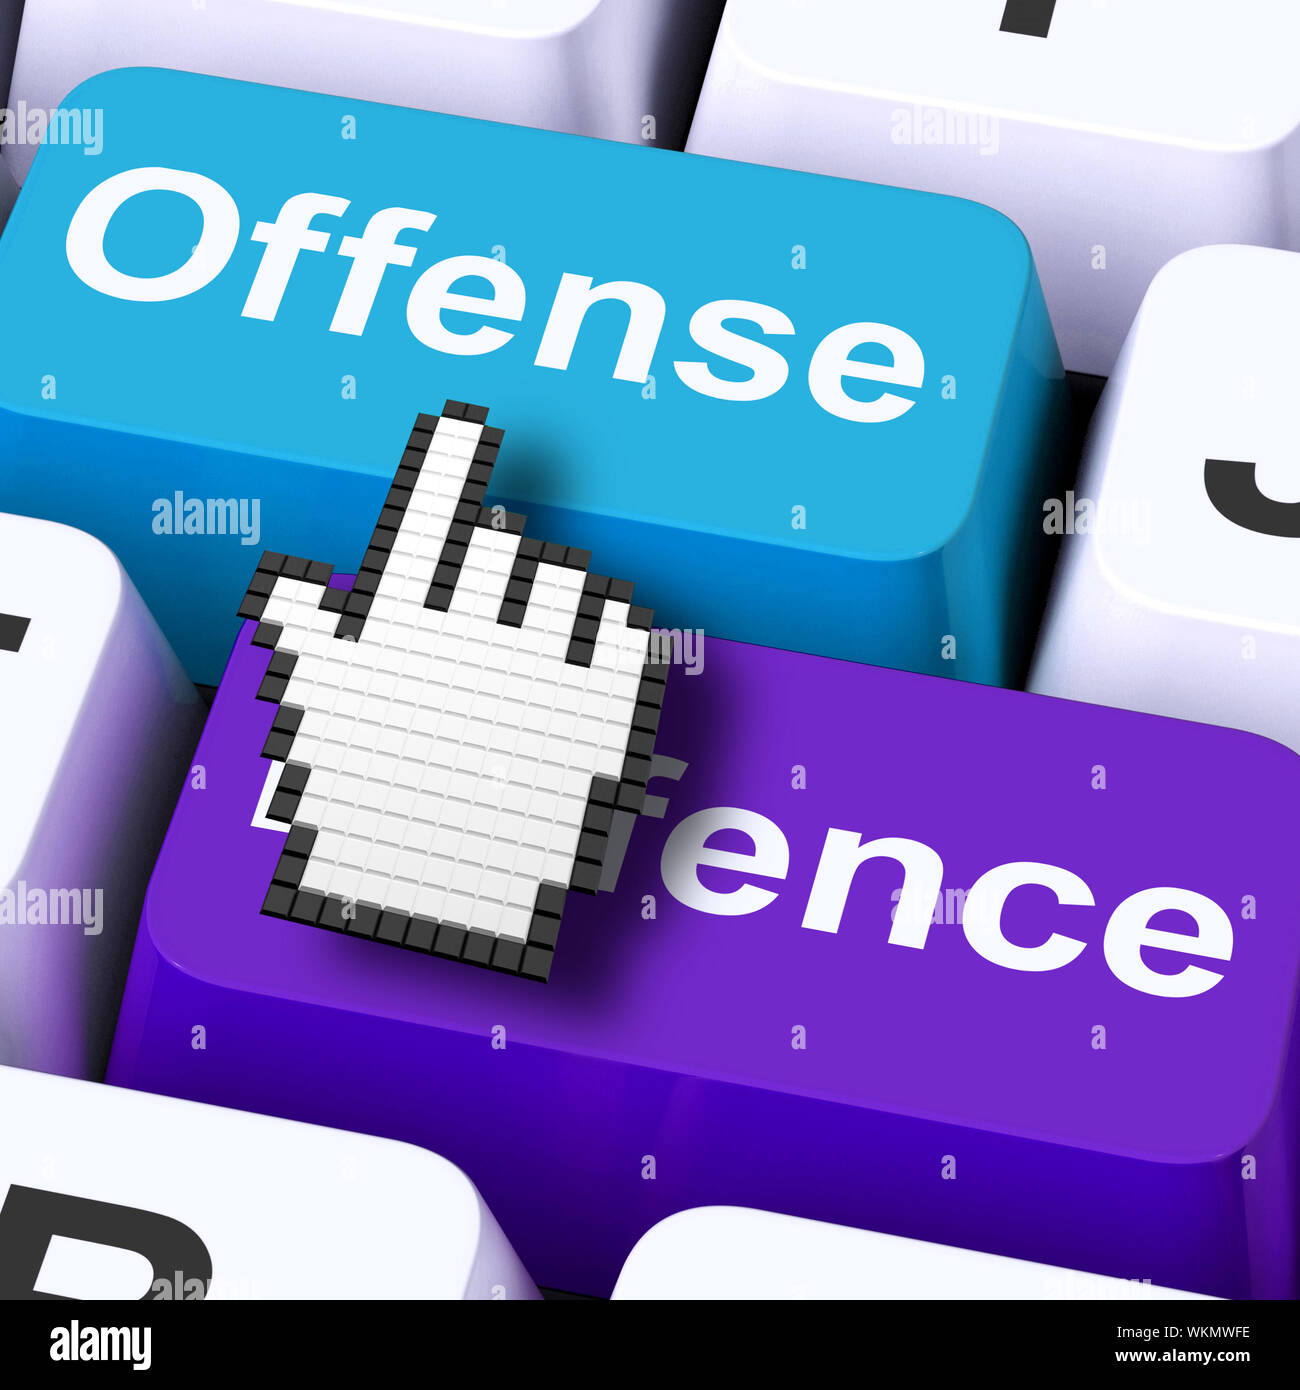 Offense Aggressive Computer Showing Attack Or Defend Stock Photo